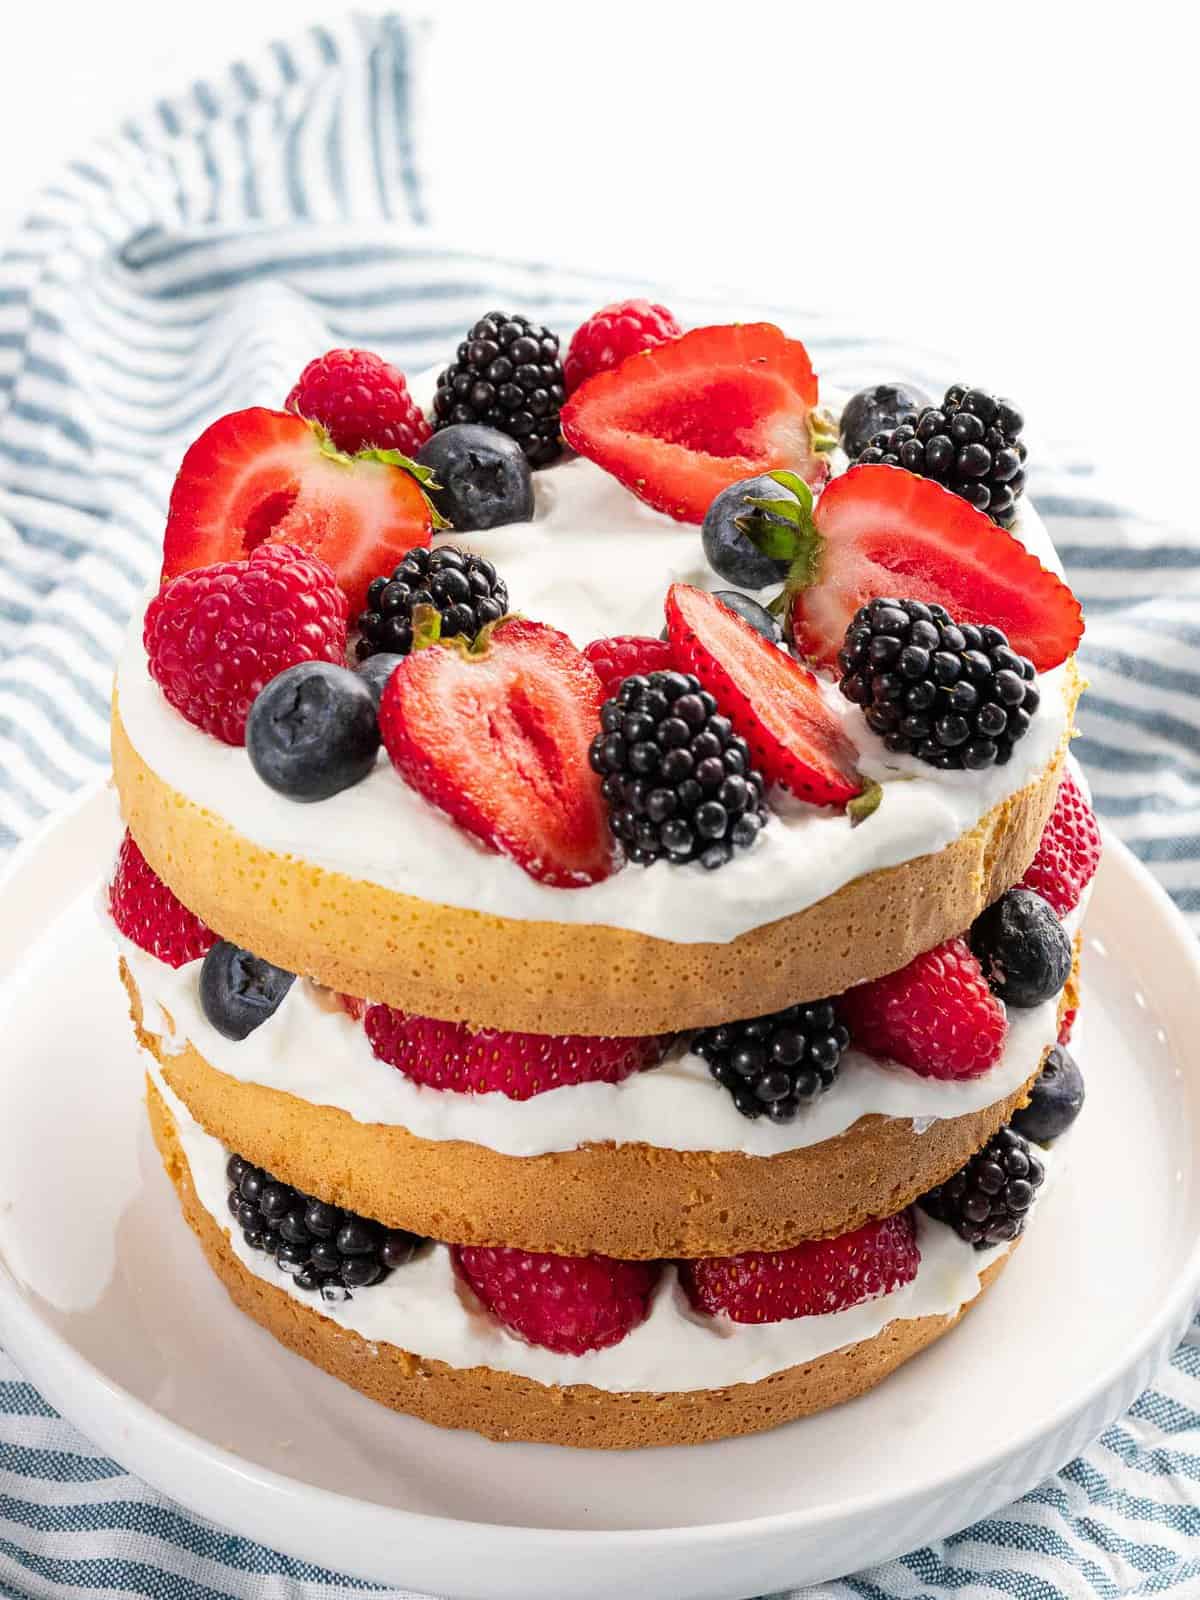 Summer berry cake made with mixed berries and whipped cream.